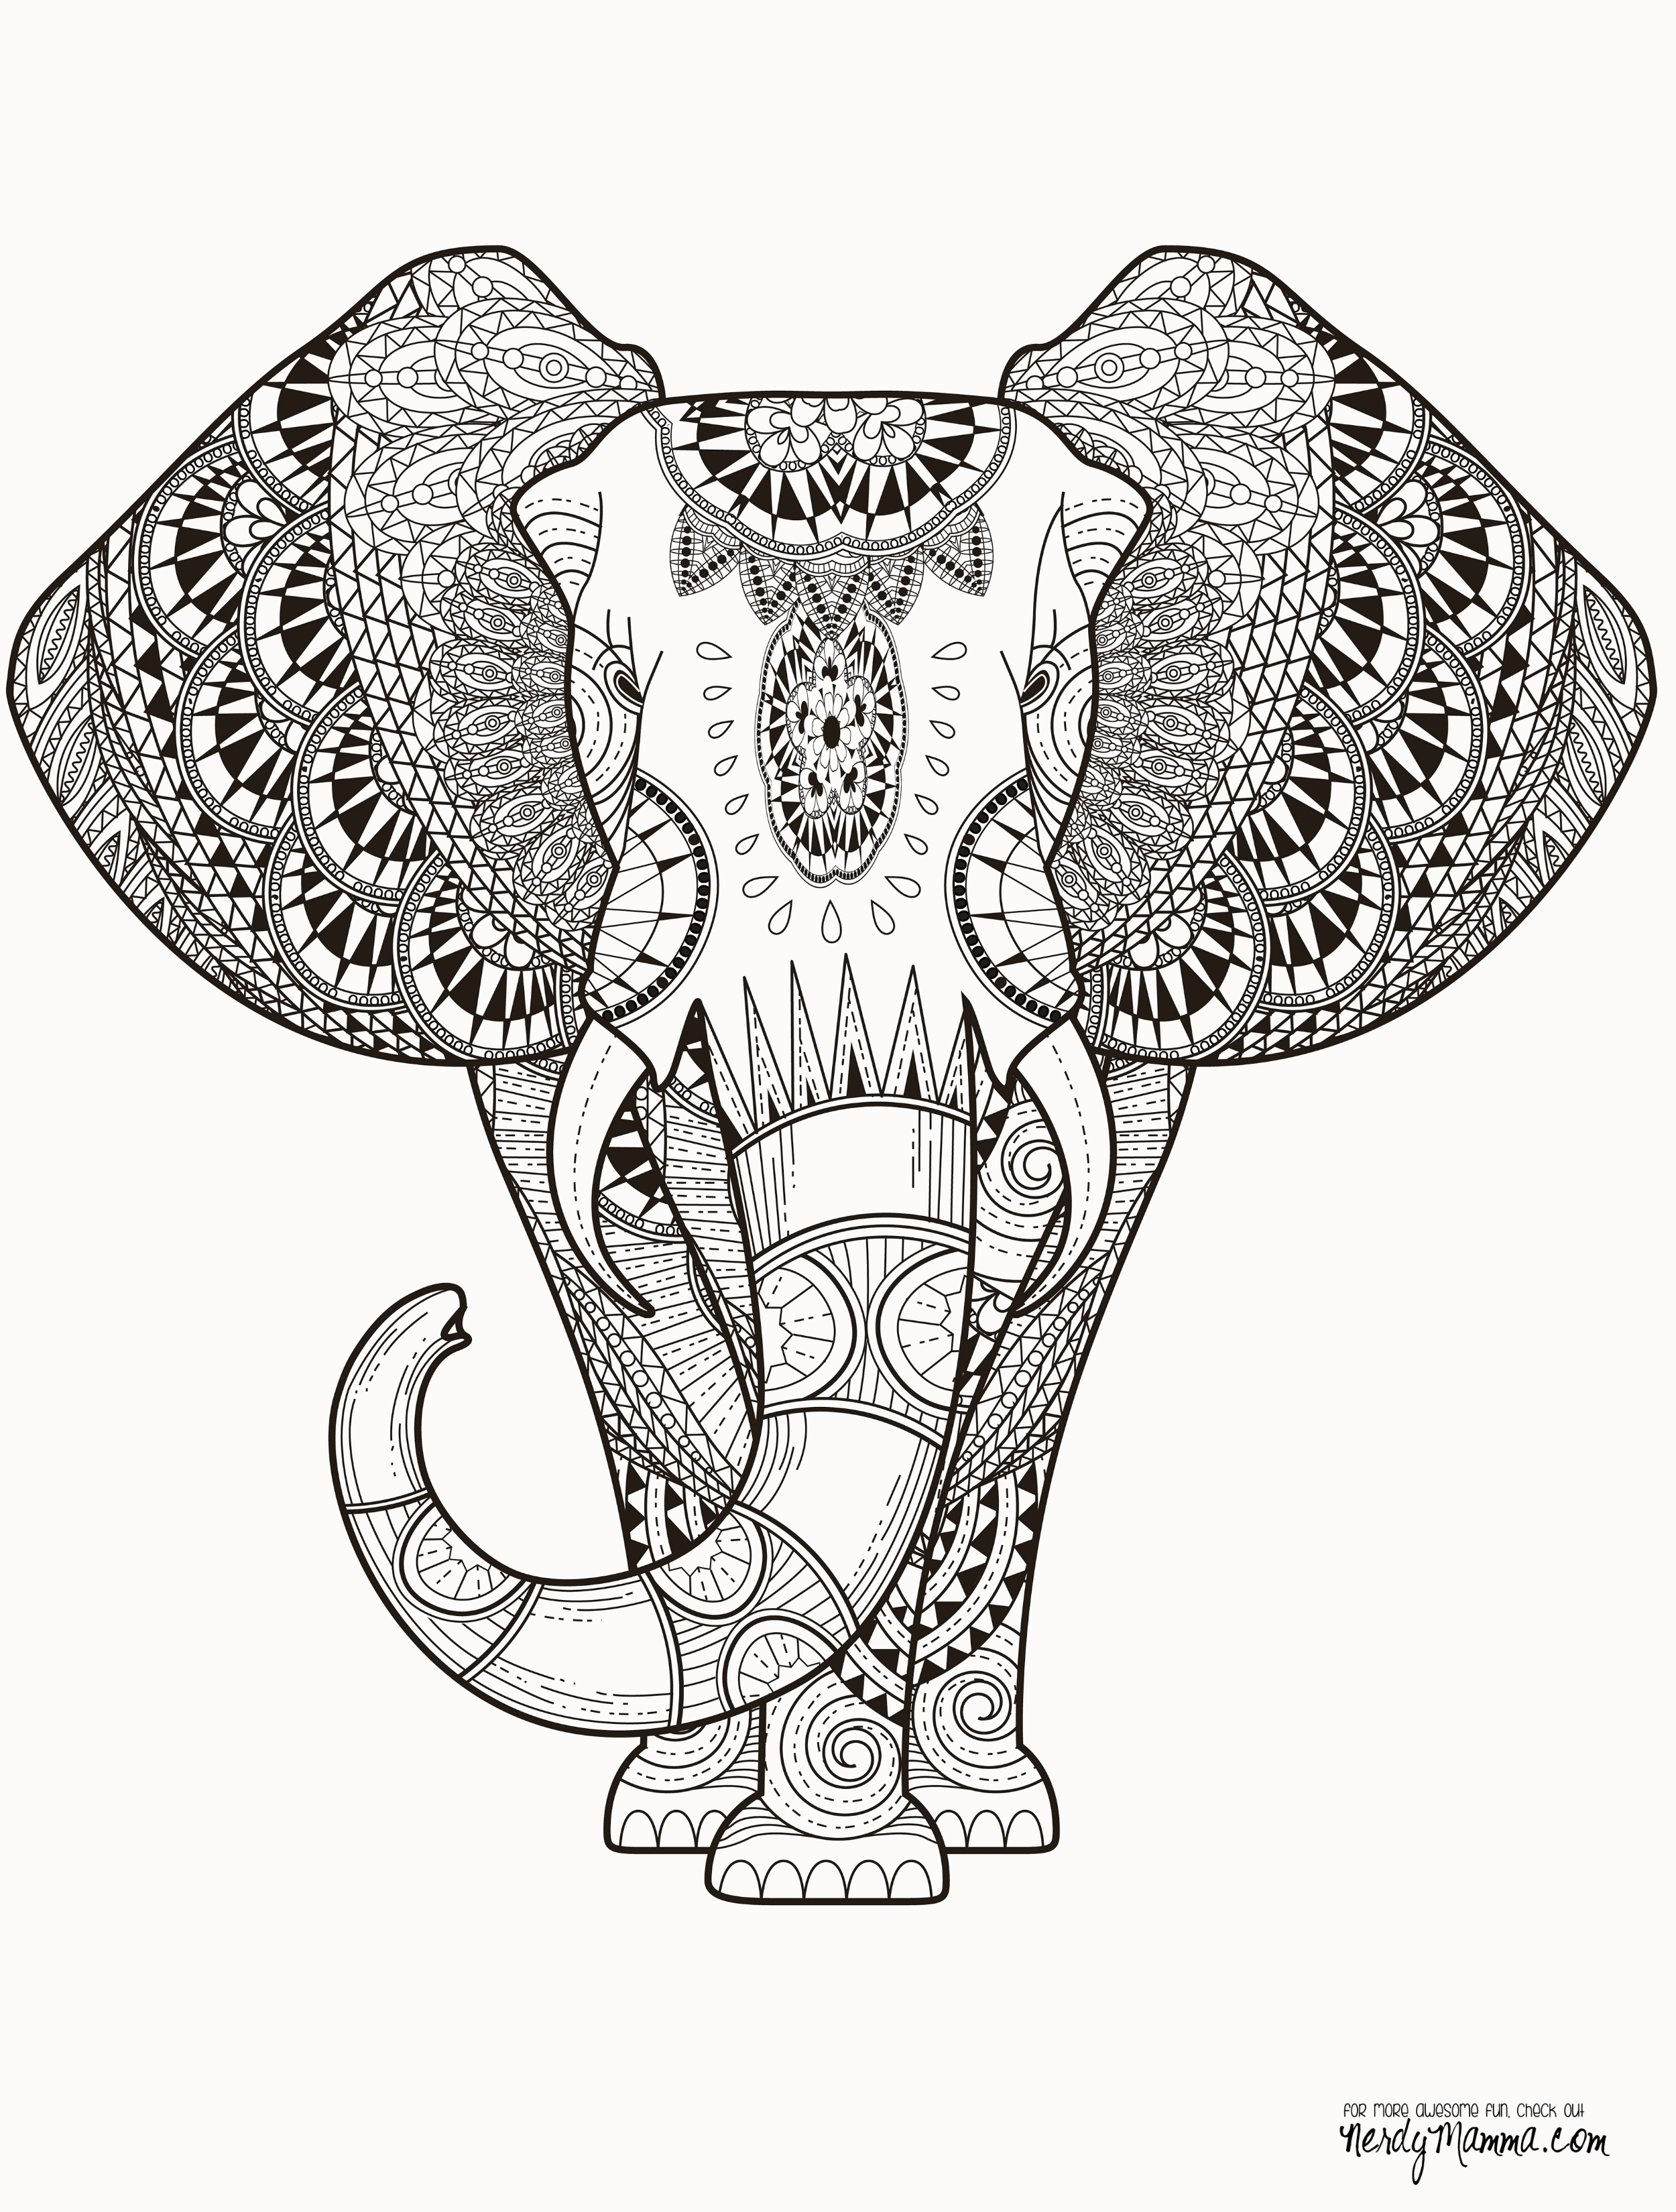 Free Online Adult Coloring Pages - Coloring Nation